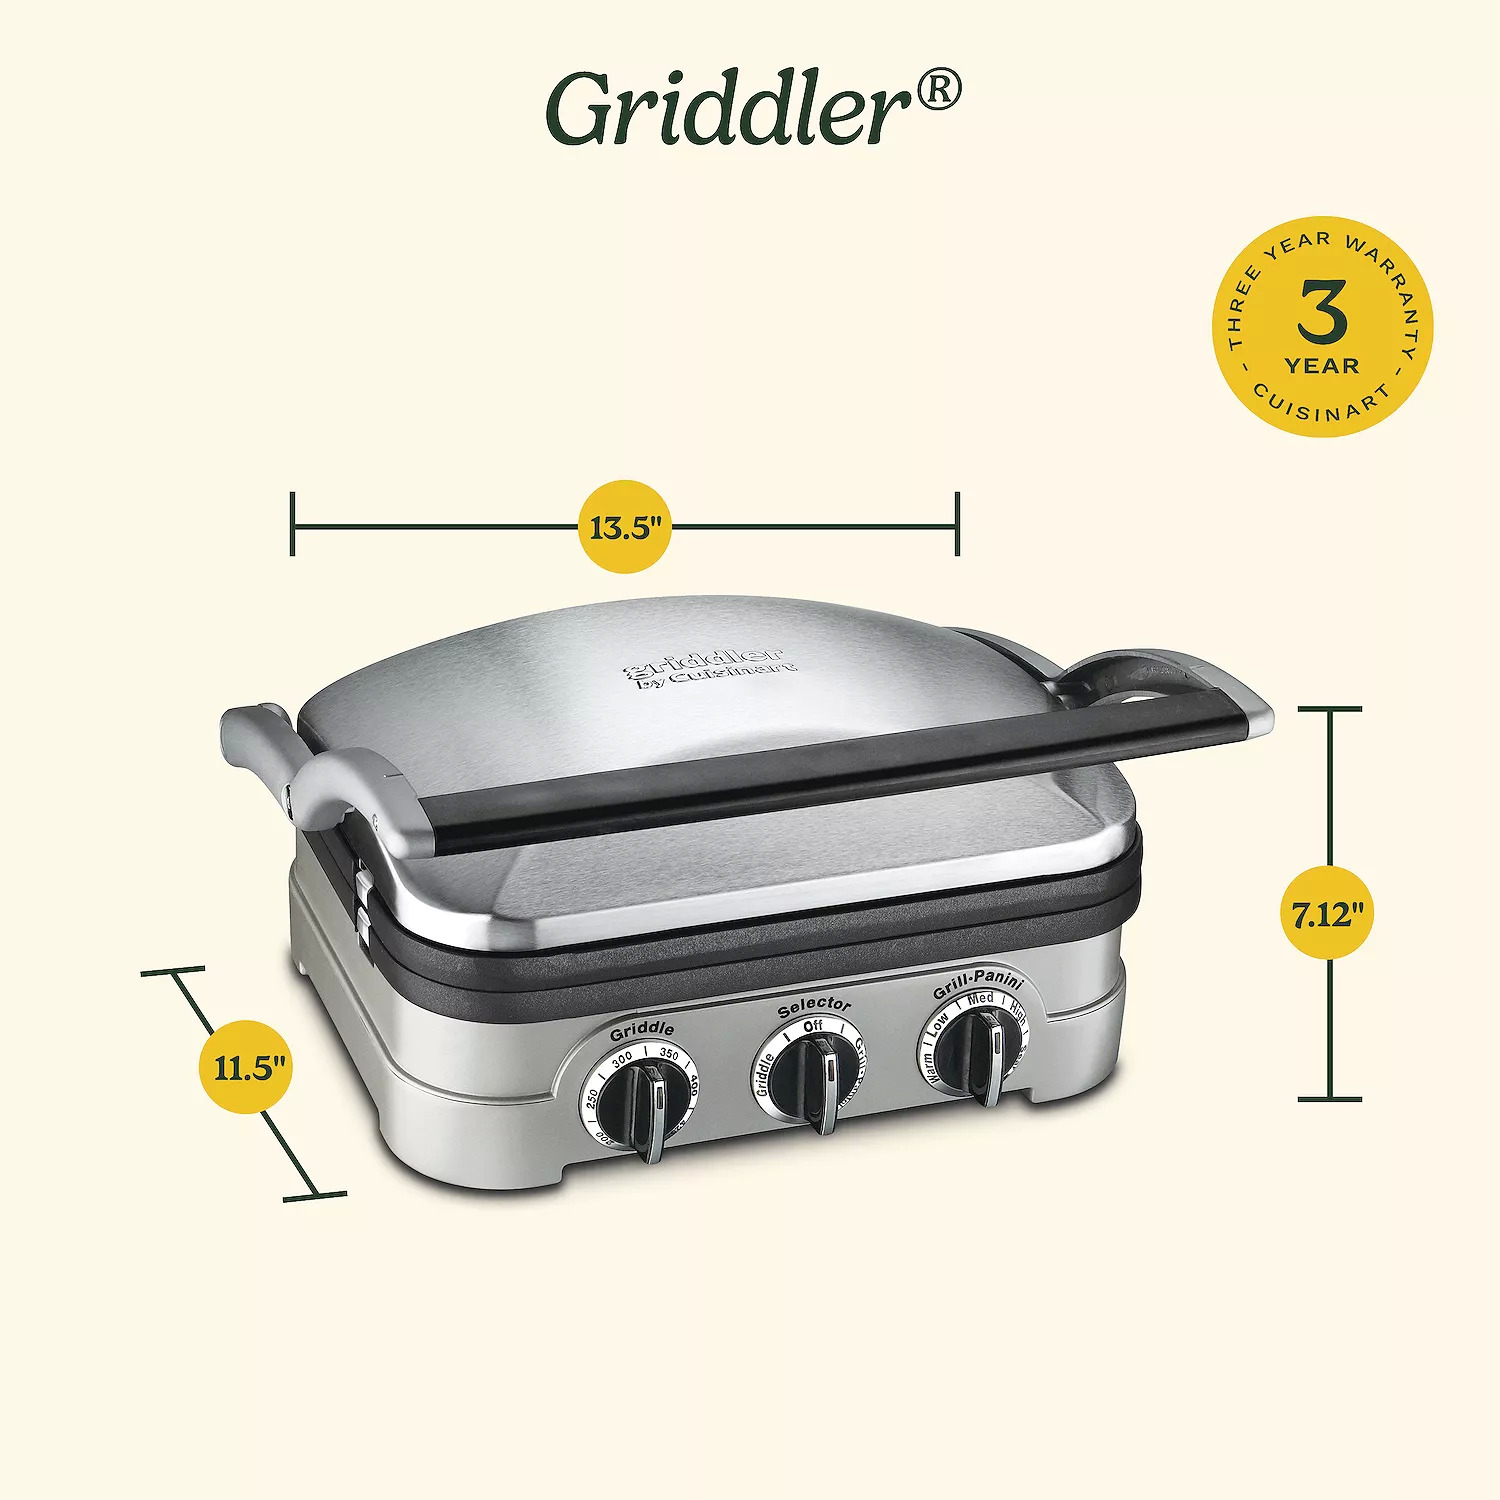 Cuisinart compact griddler 5-in-1 w/ 40% discount (Targetted email) - $47.99